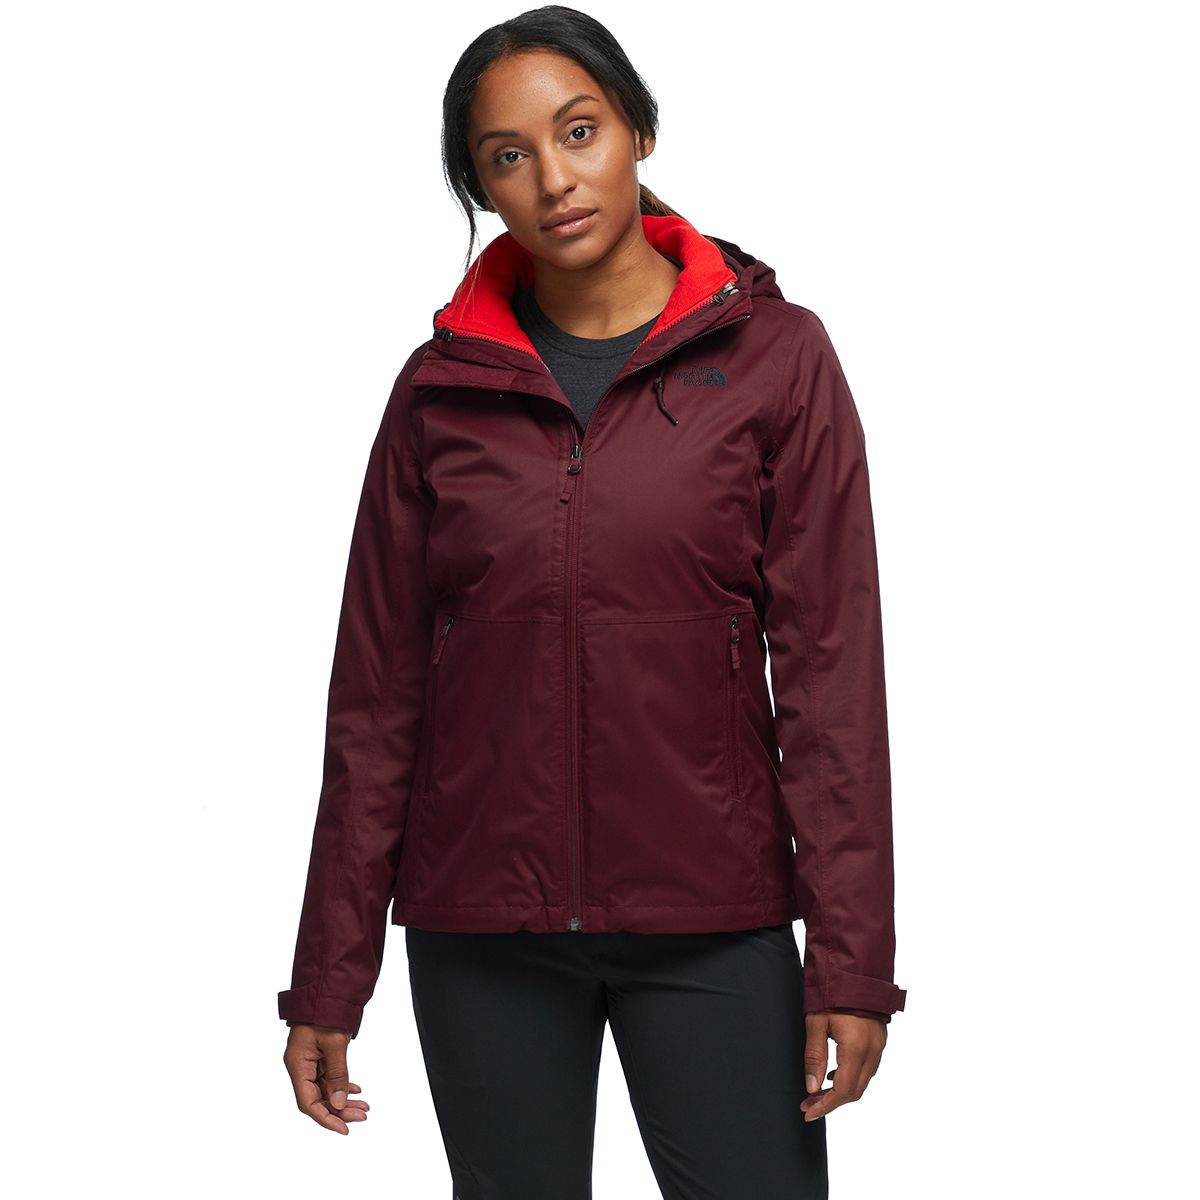 north face jacket womens 3 in 1